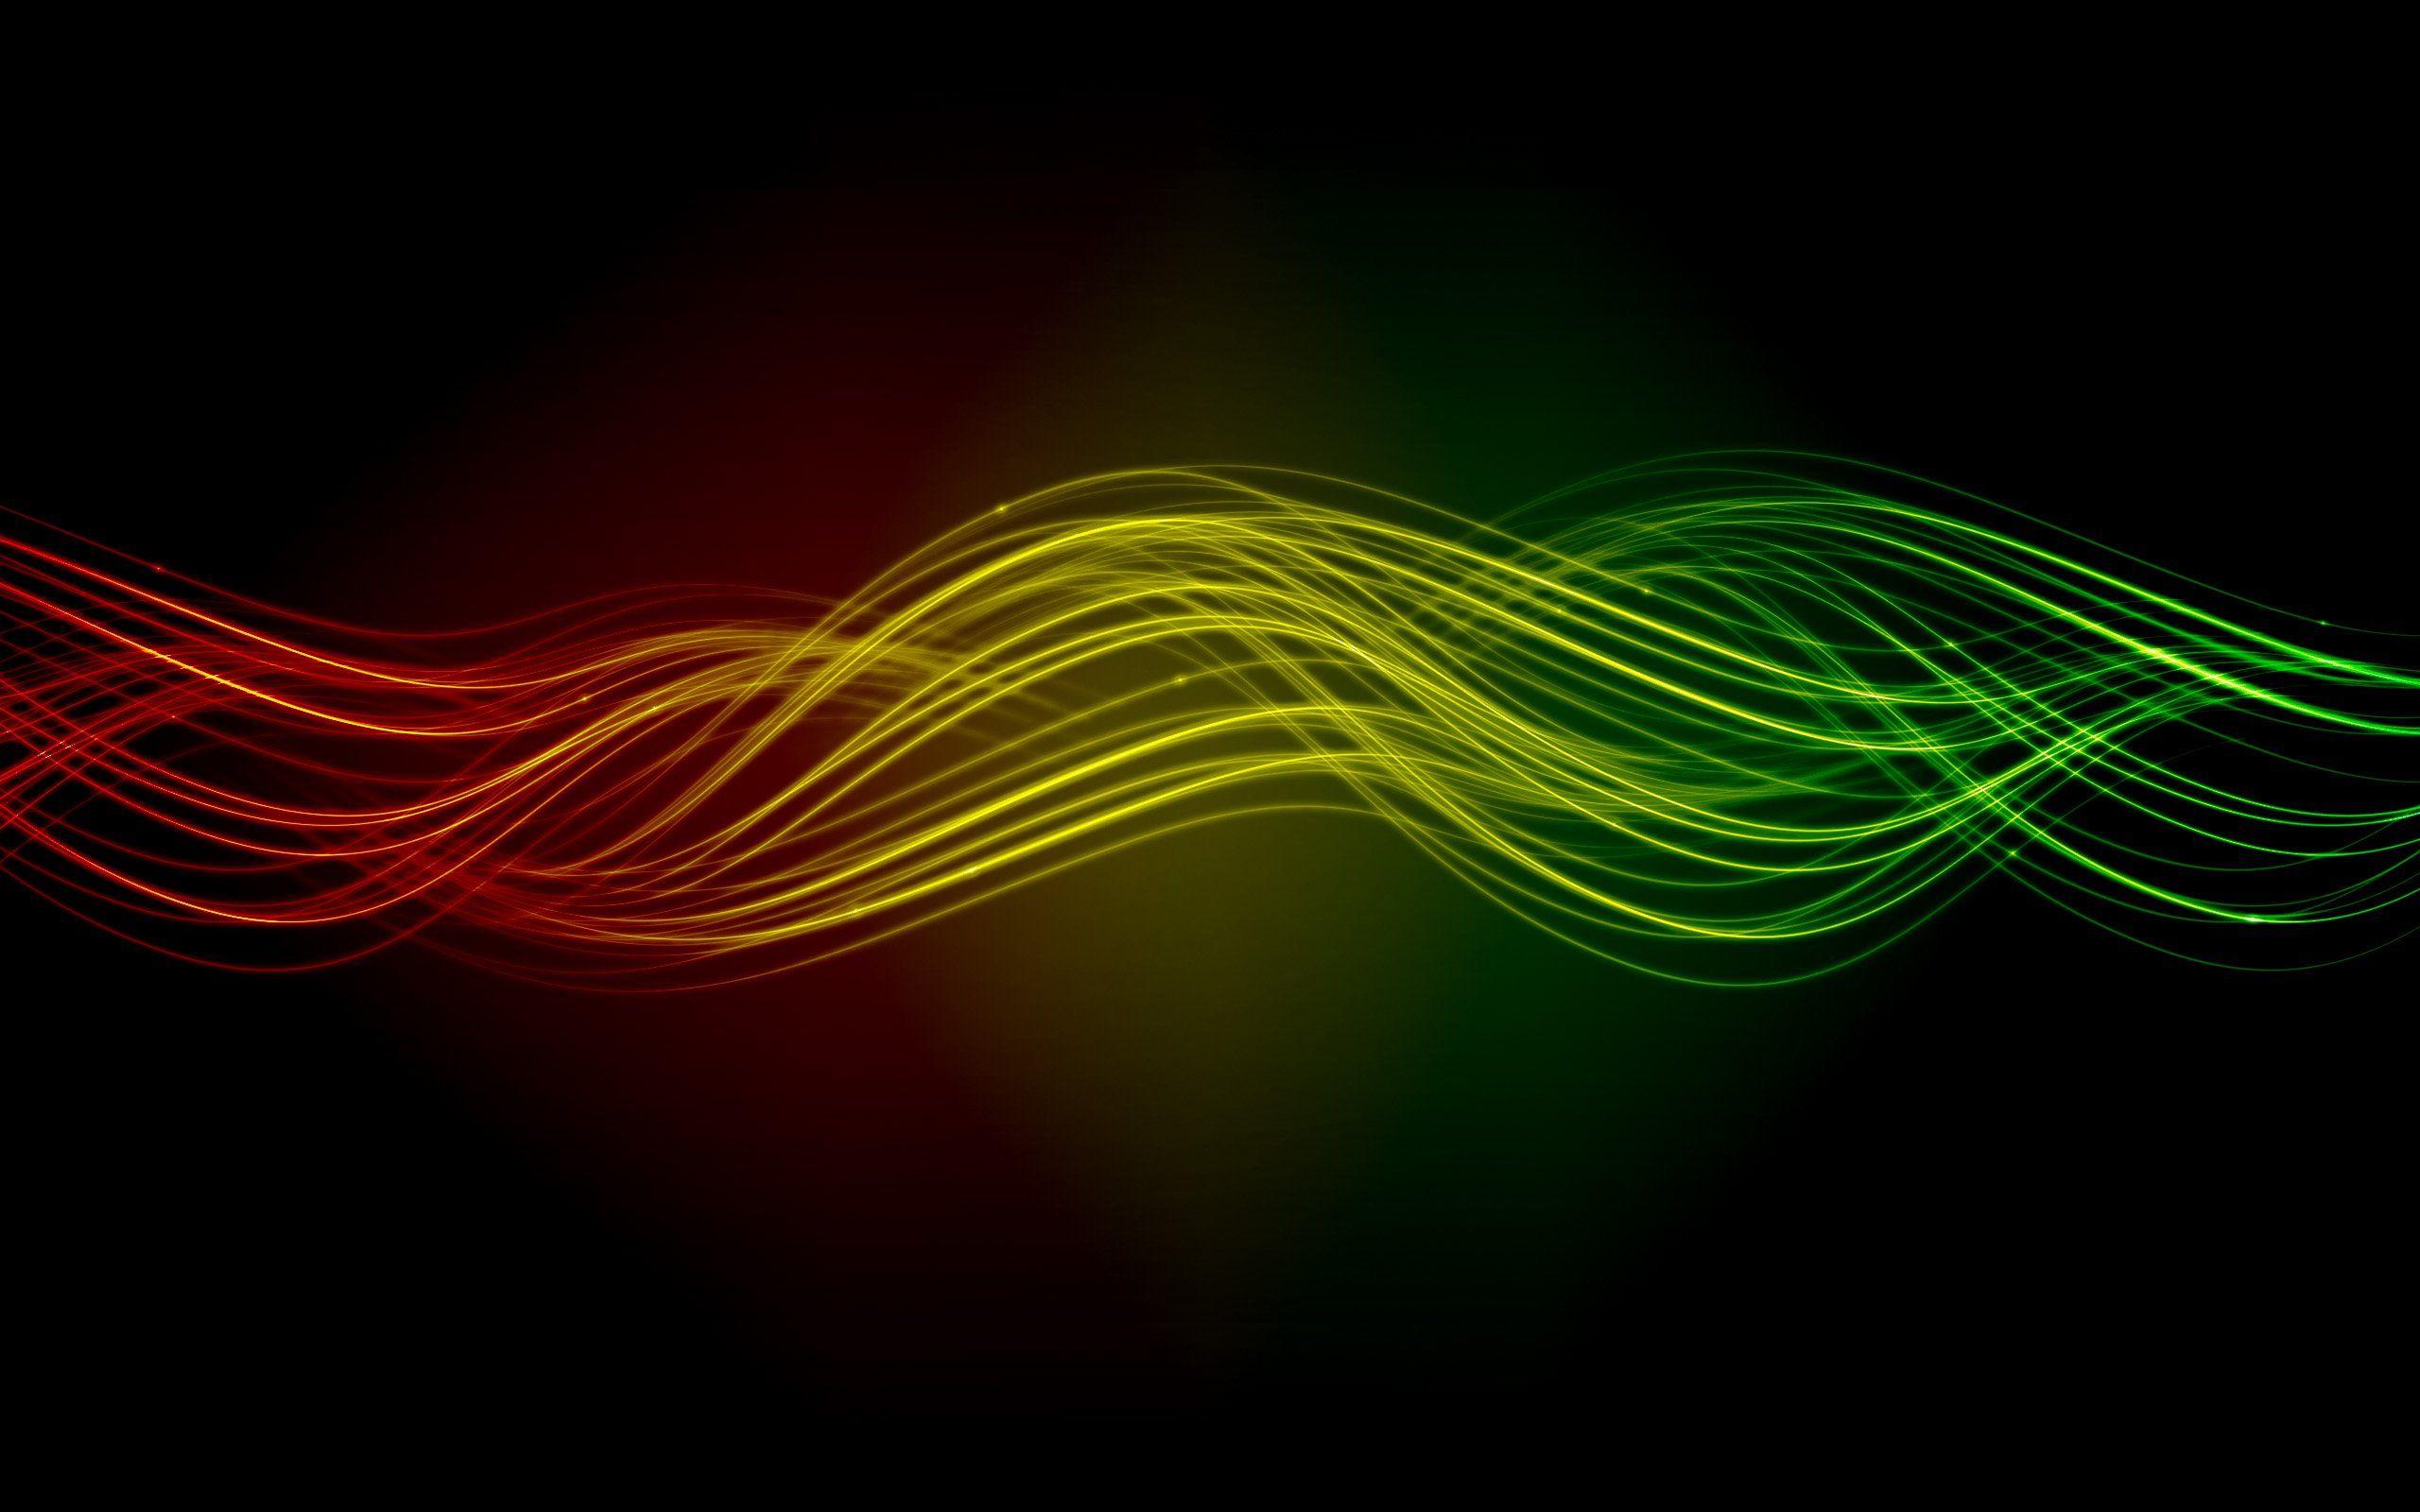 Yellow and Red Waves Logo - Red Waves Wallpapers High Quality | Download Free